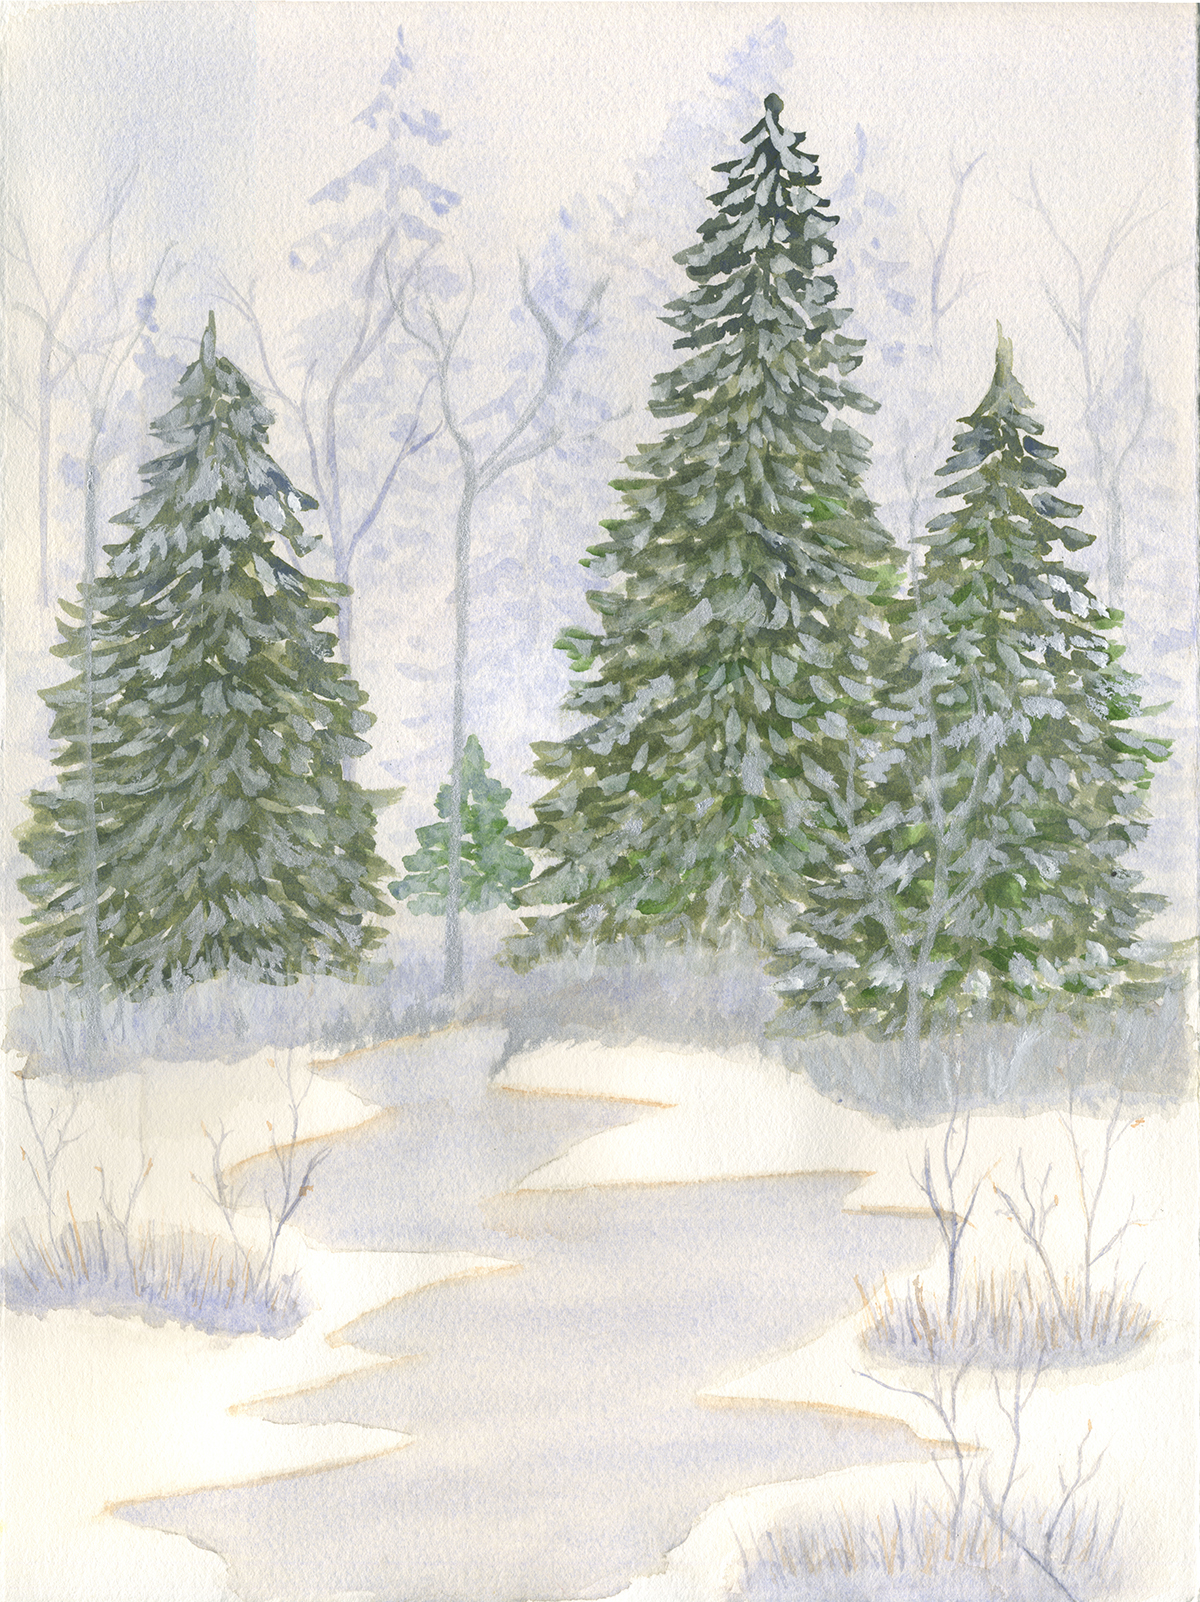 Artwork created by Peggy Ritter of New Perspective Senior Living, Eagan, Minn. will be featured in Christmas cards for the company's 21 residences throughout the Midwest.